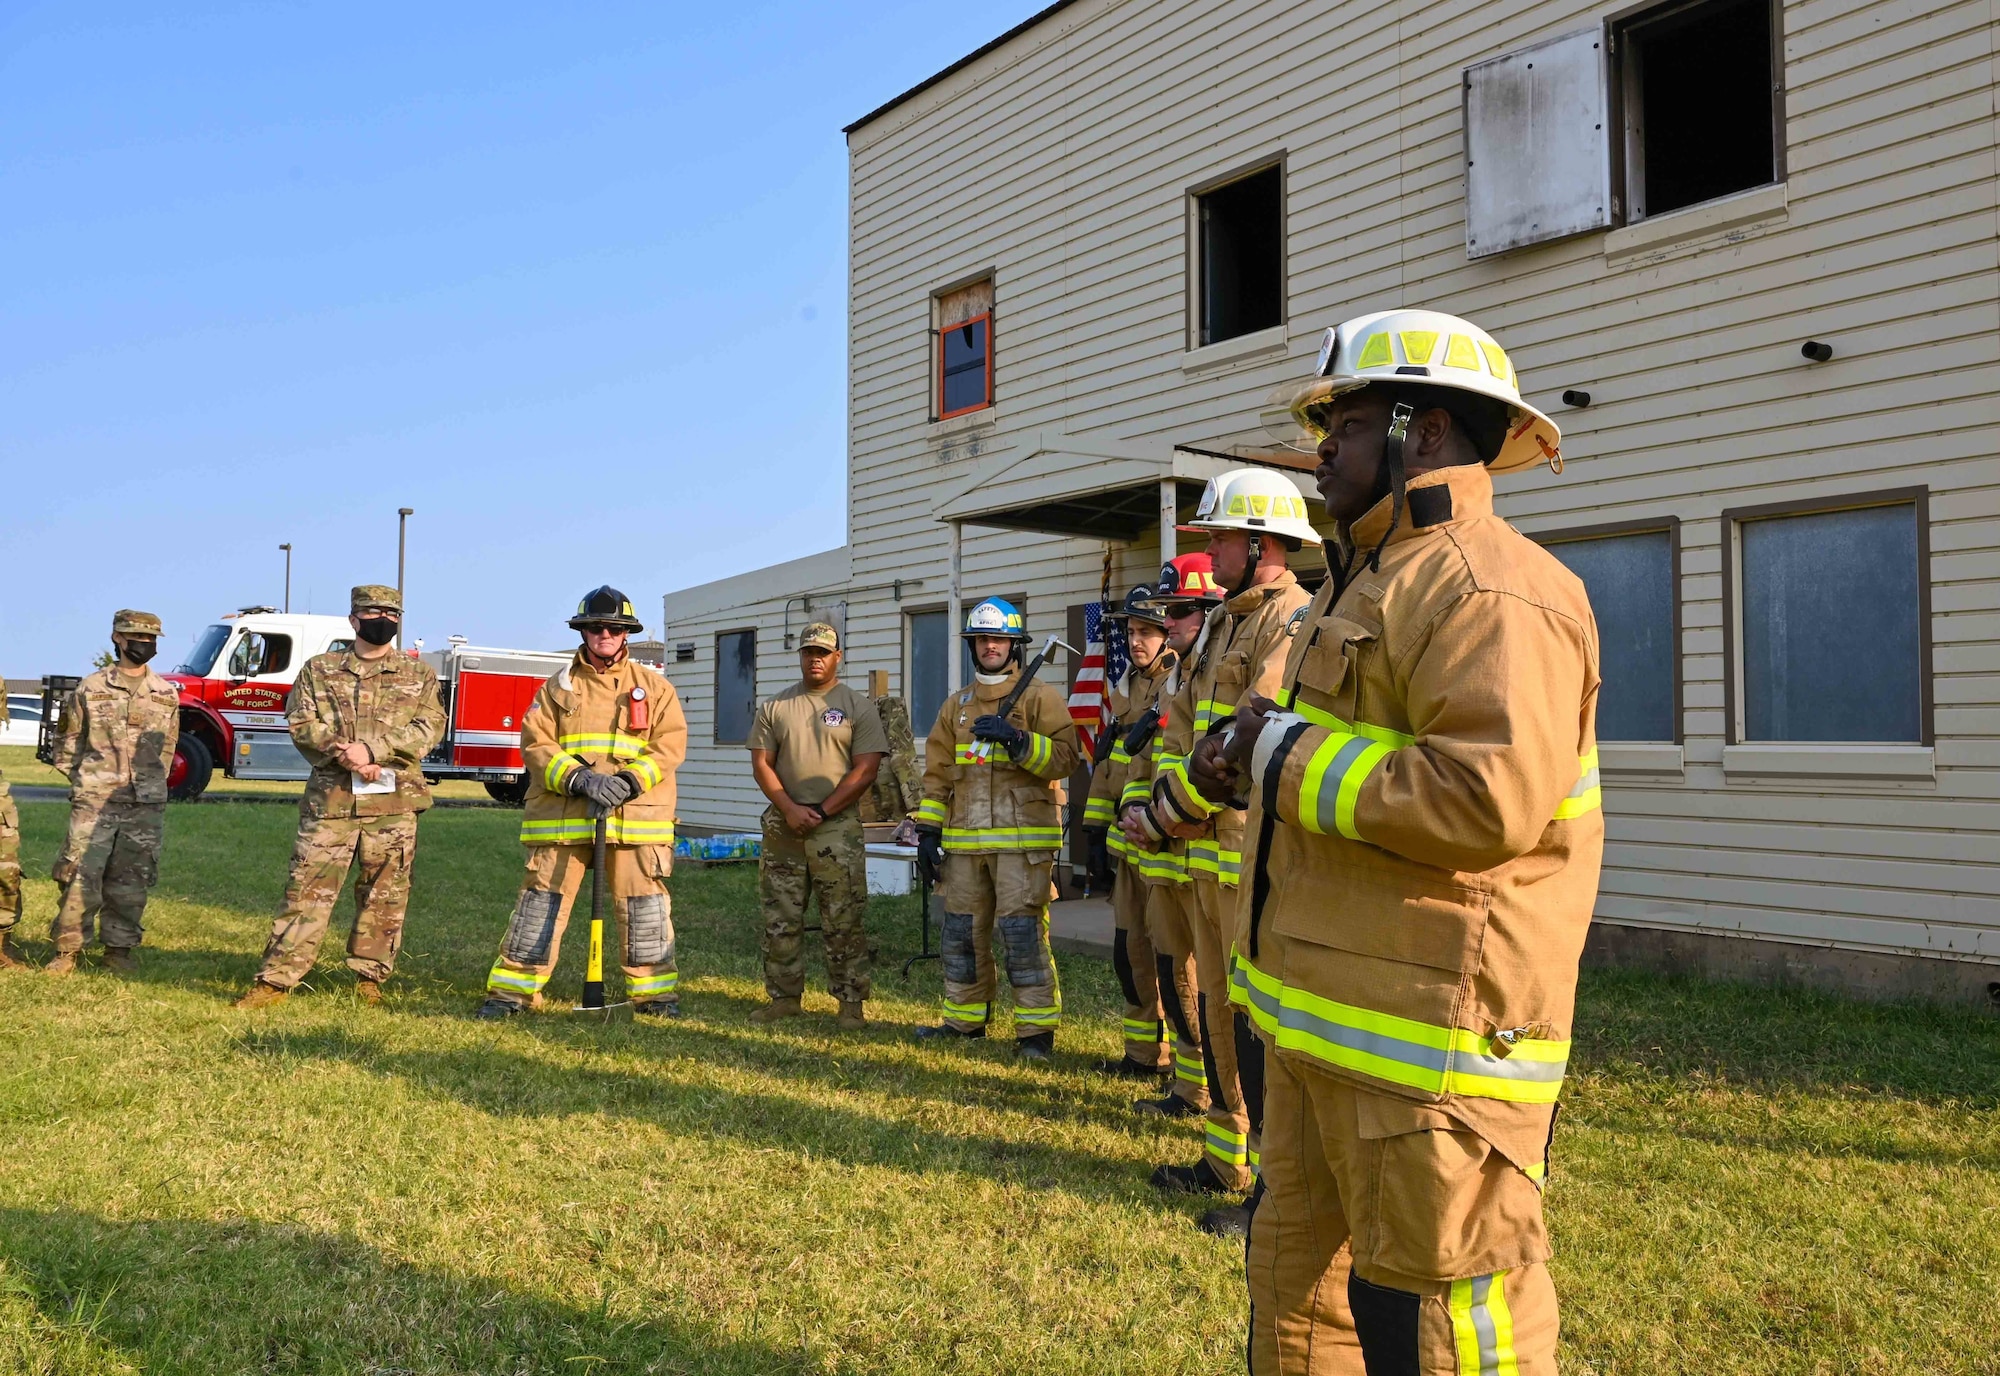 Briefing the firefighters